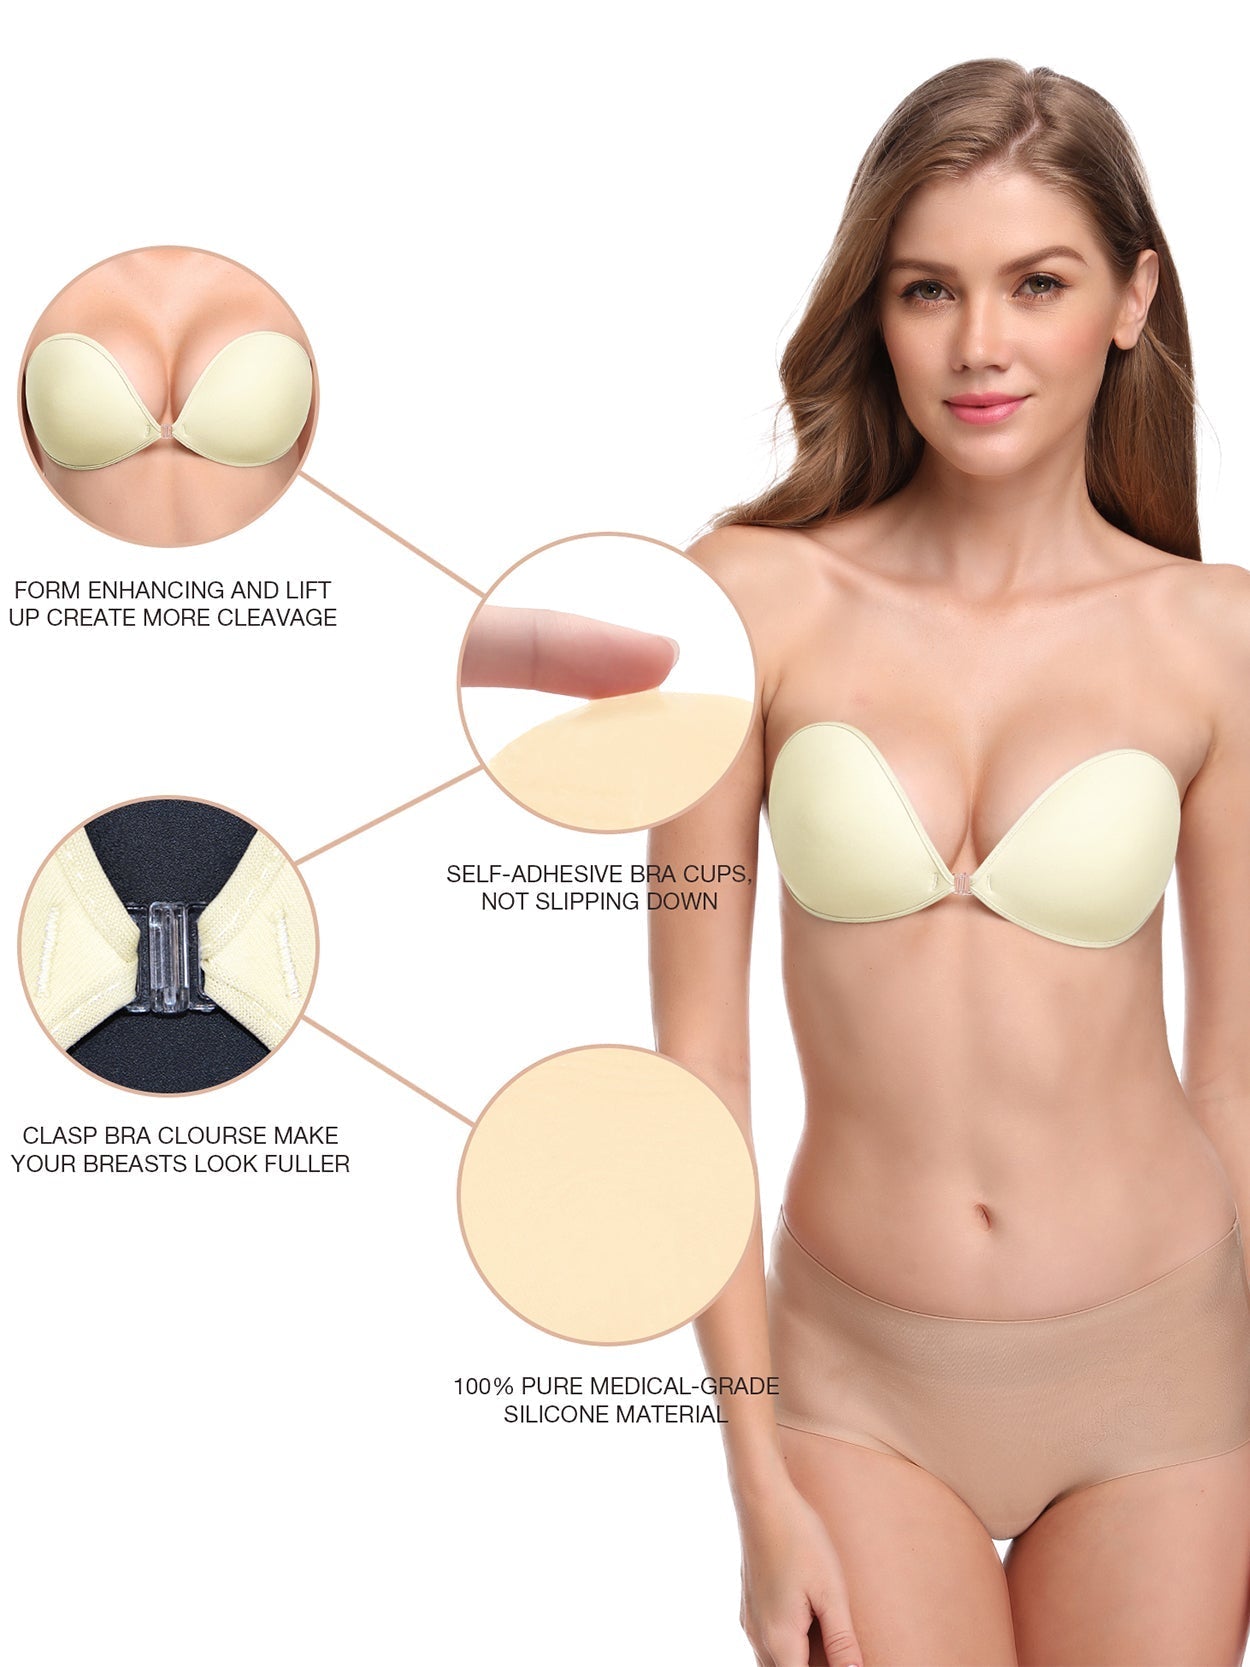 Wingslove Adhesive Bra Strapless Silicone Invisible Push Up Reusable Self  Sticky Bra for Backless Dress Stick on Bra